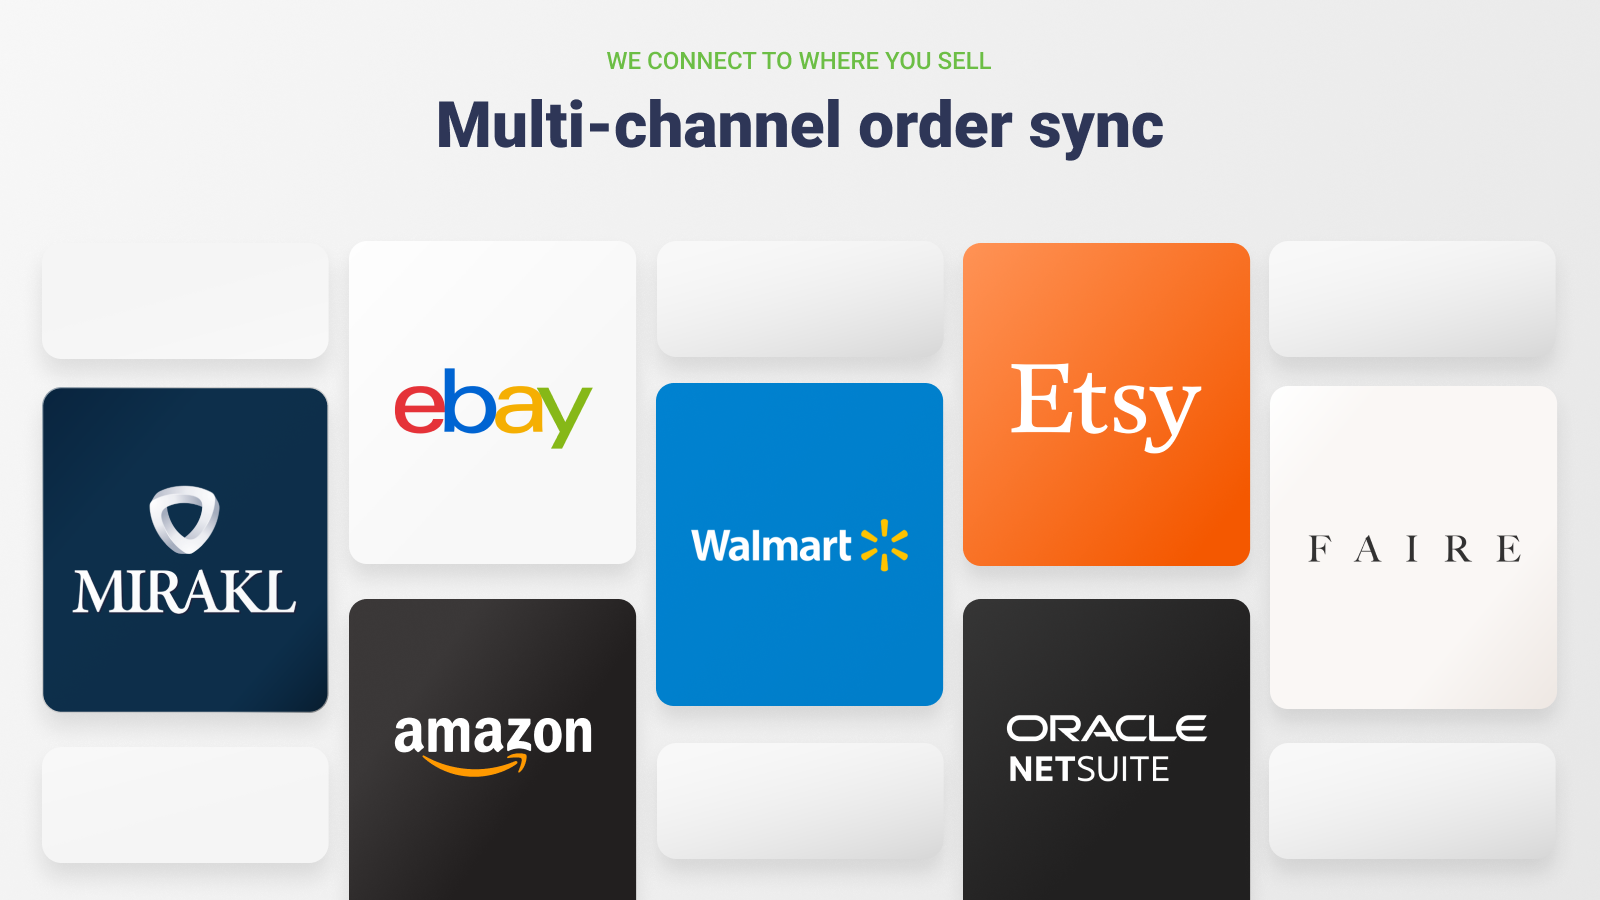 Wherever you sell: multi-channel order sync in one platform.